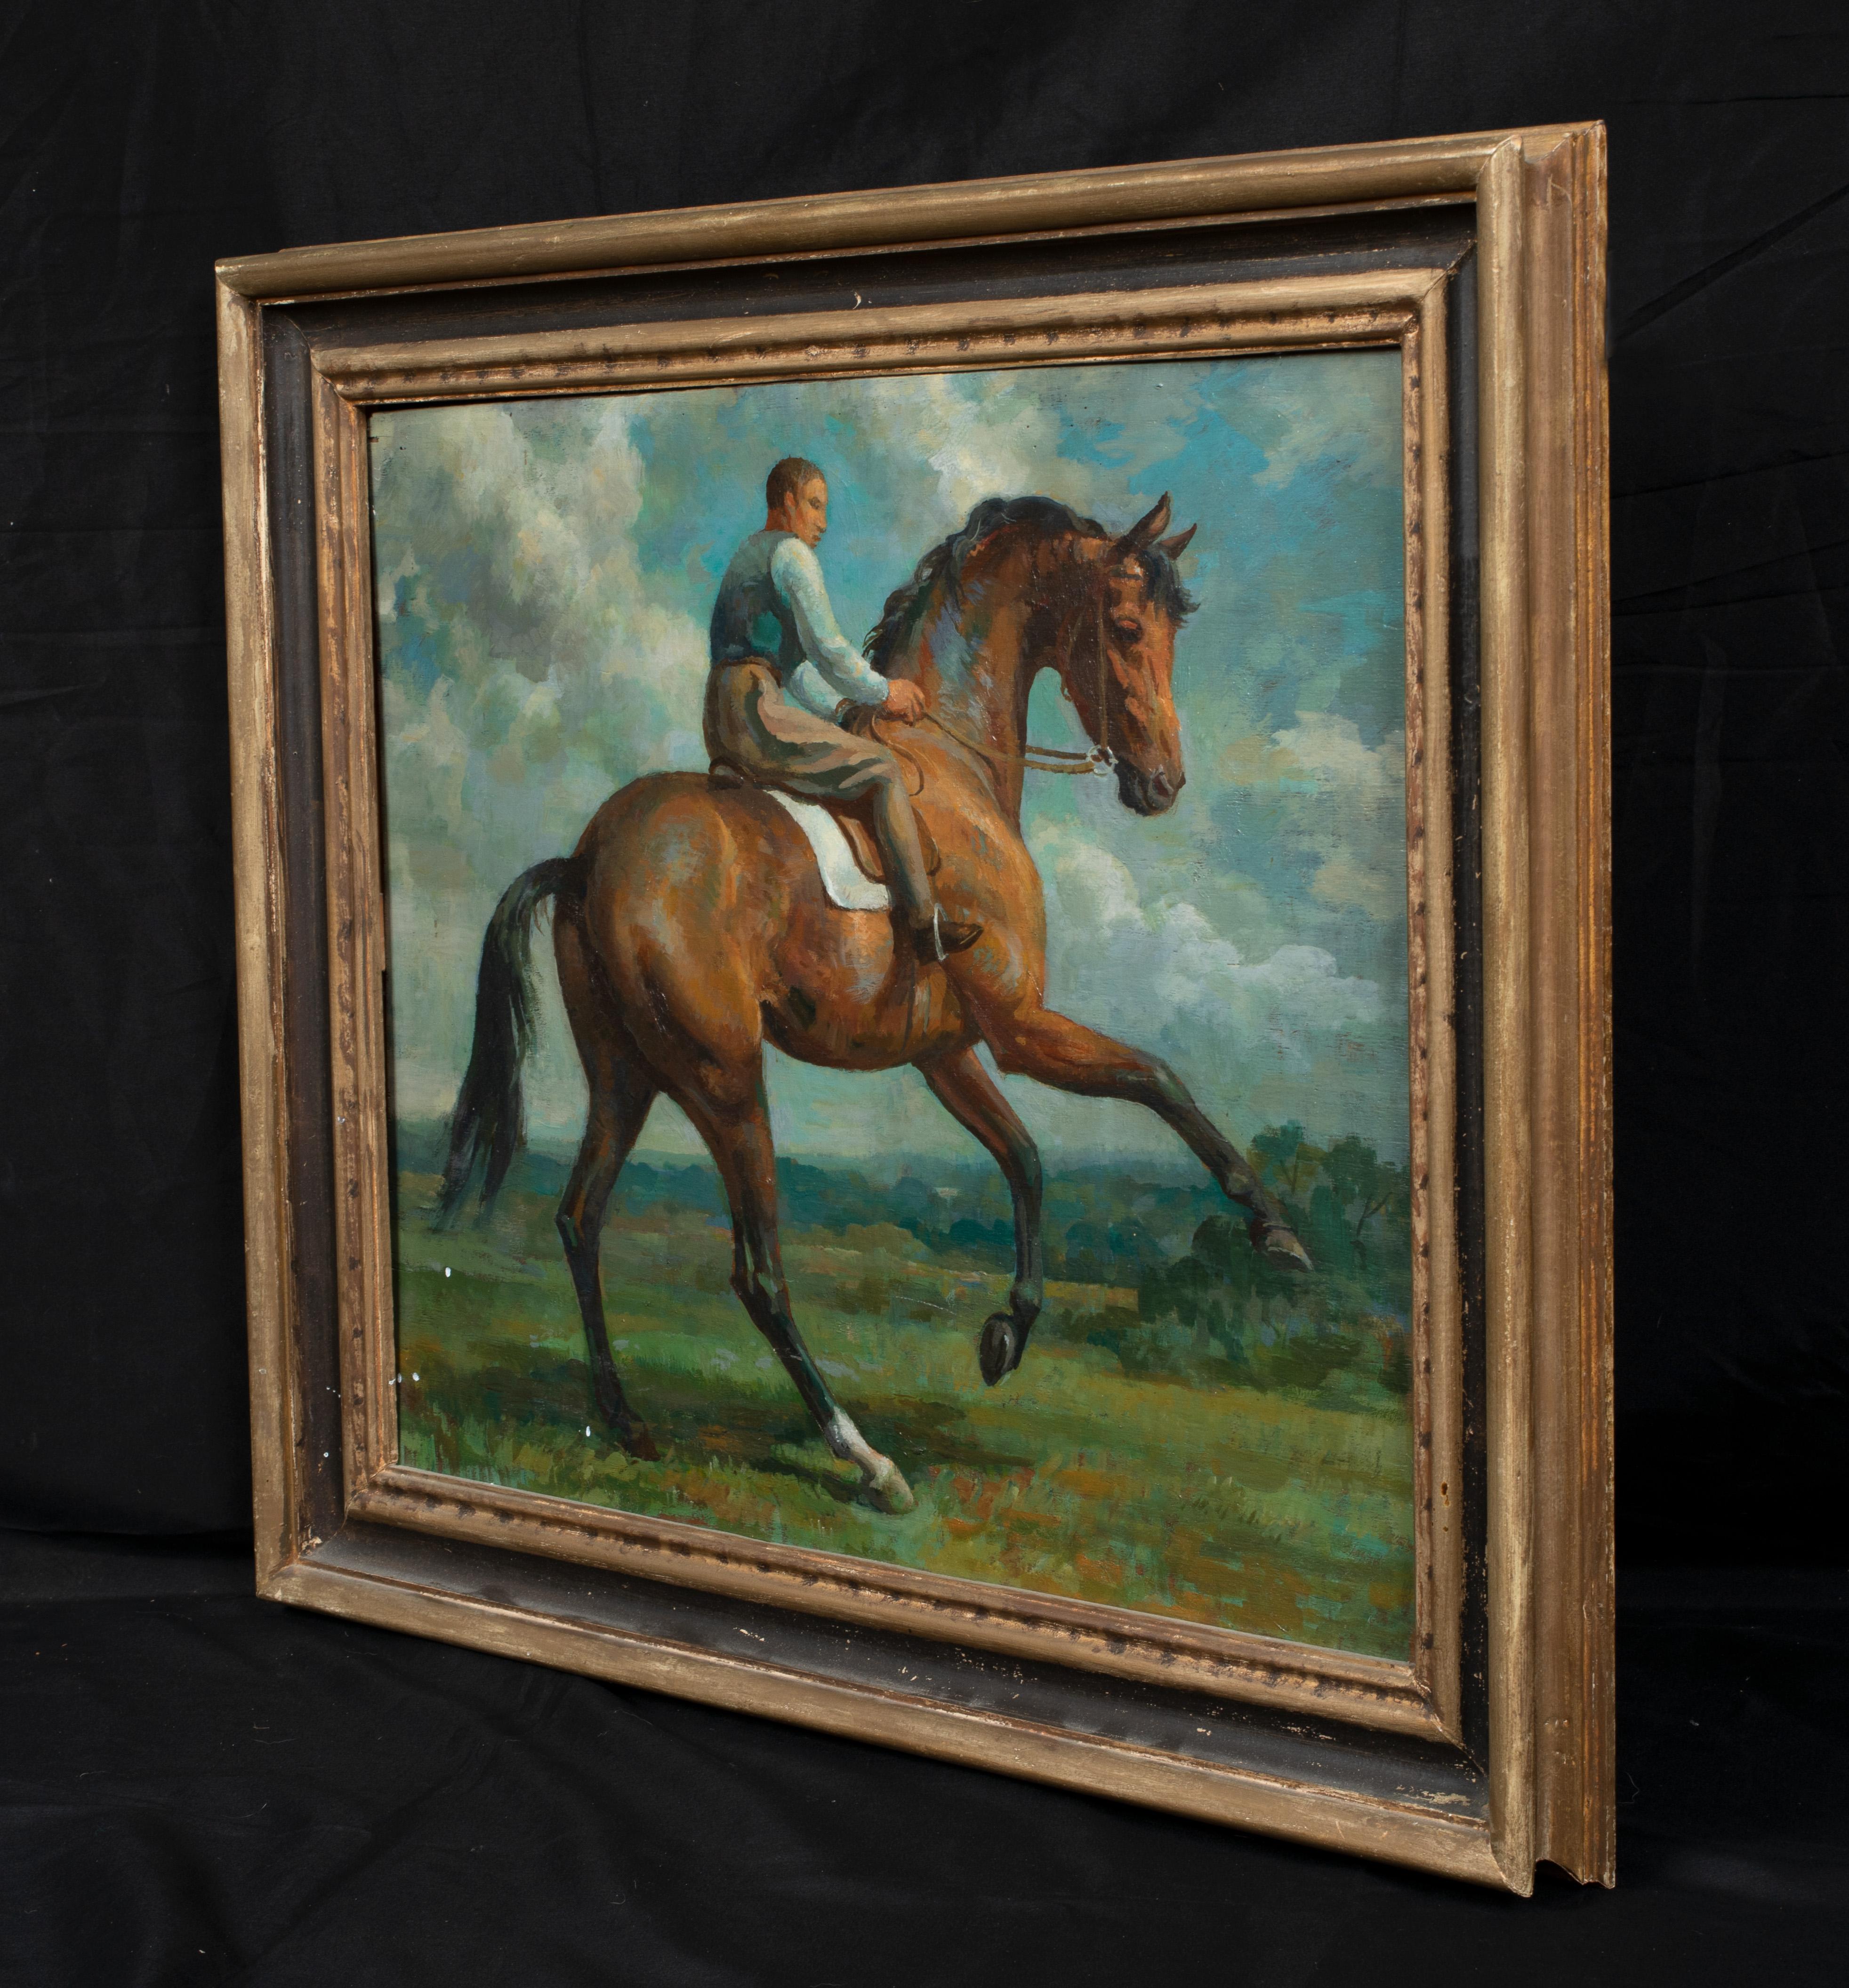 Horse & Jockey, early 20th Century 

by Lionel ELLIS (1903-1988)

Fine early 20th century portrait of a jockey and horse in an open landscape, oil on panel. Good quality and condition example of the Ellis's work, framed and inscribed